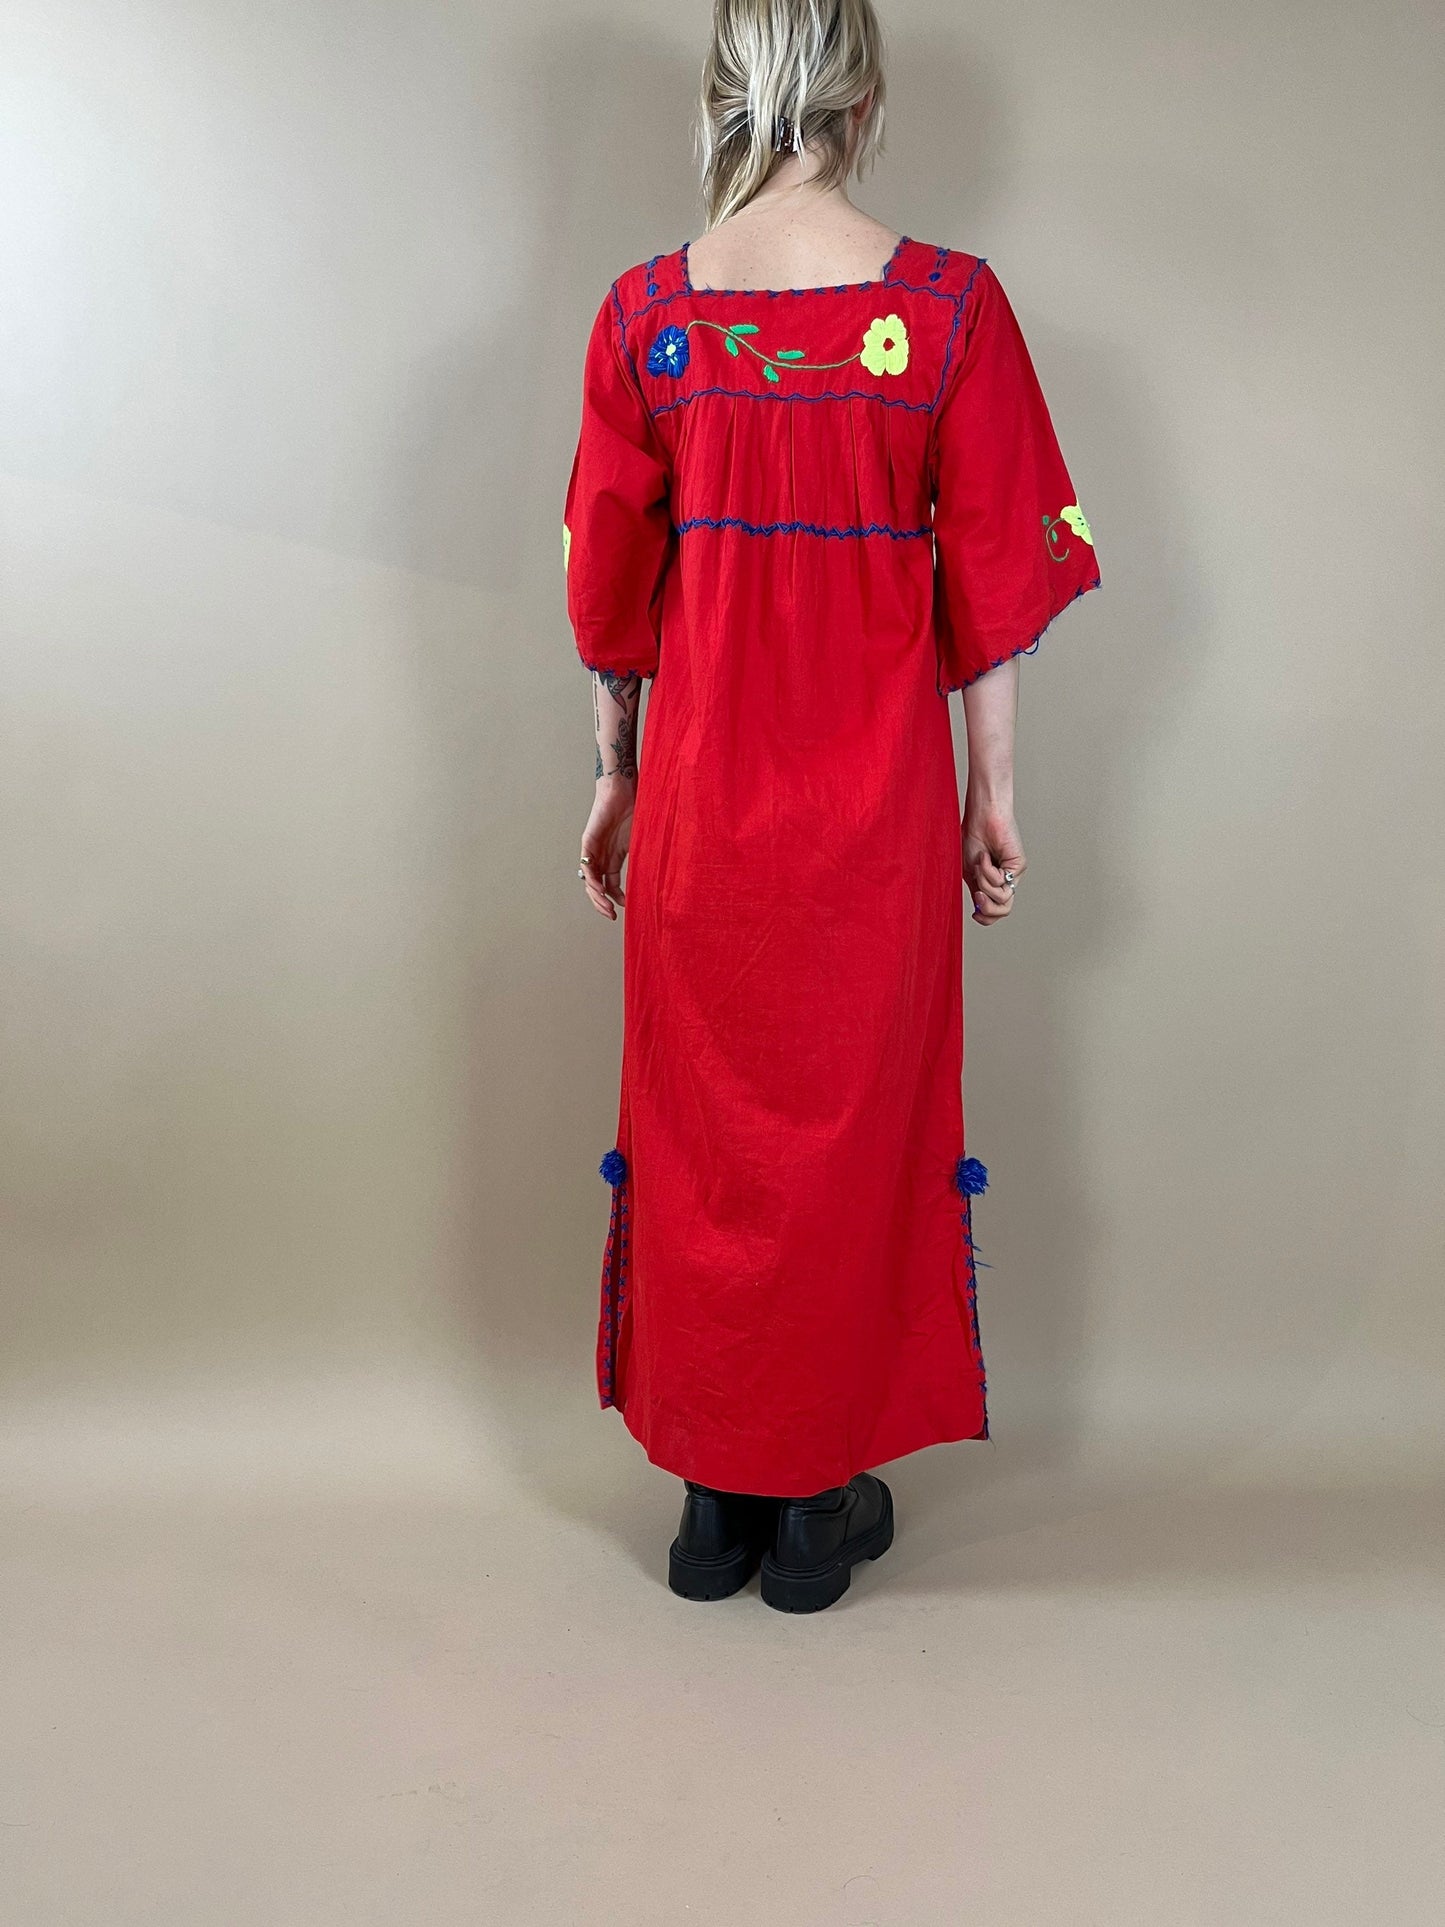 Vintage Red Cotton Mexican Embroidered Mumu Dress / Small